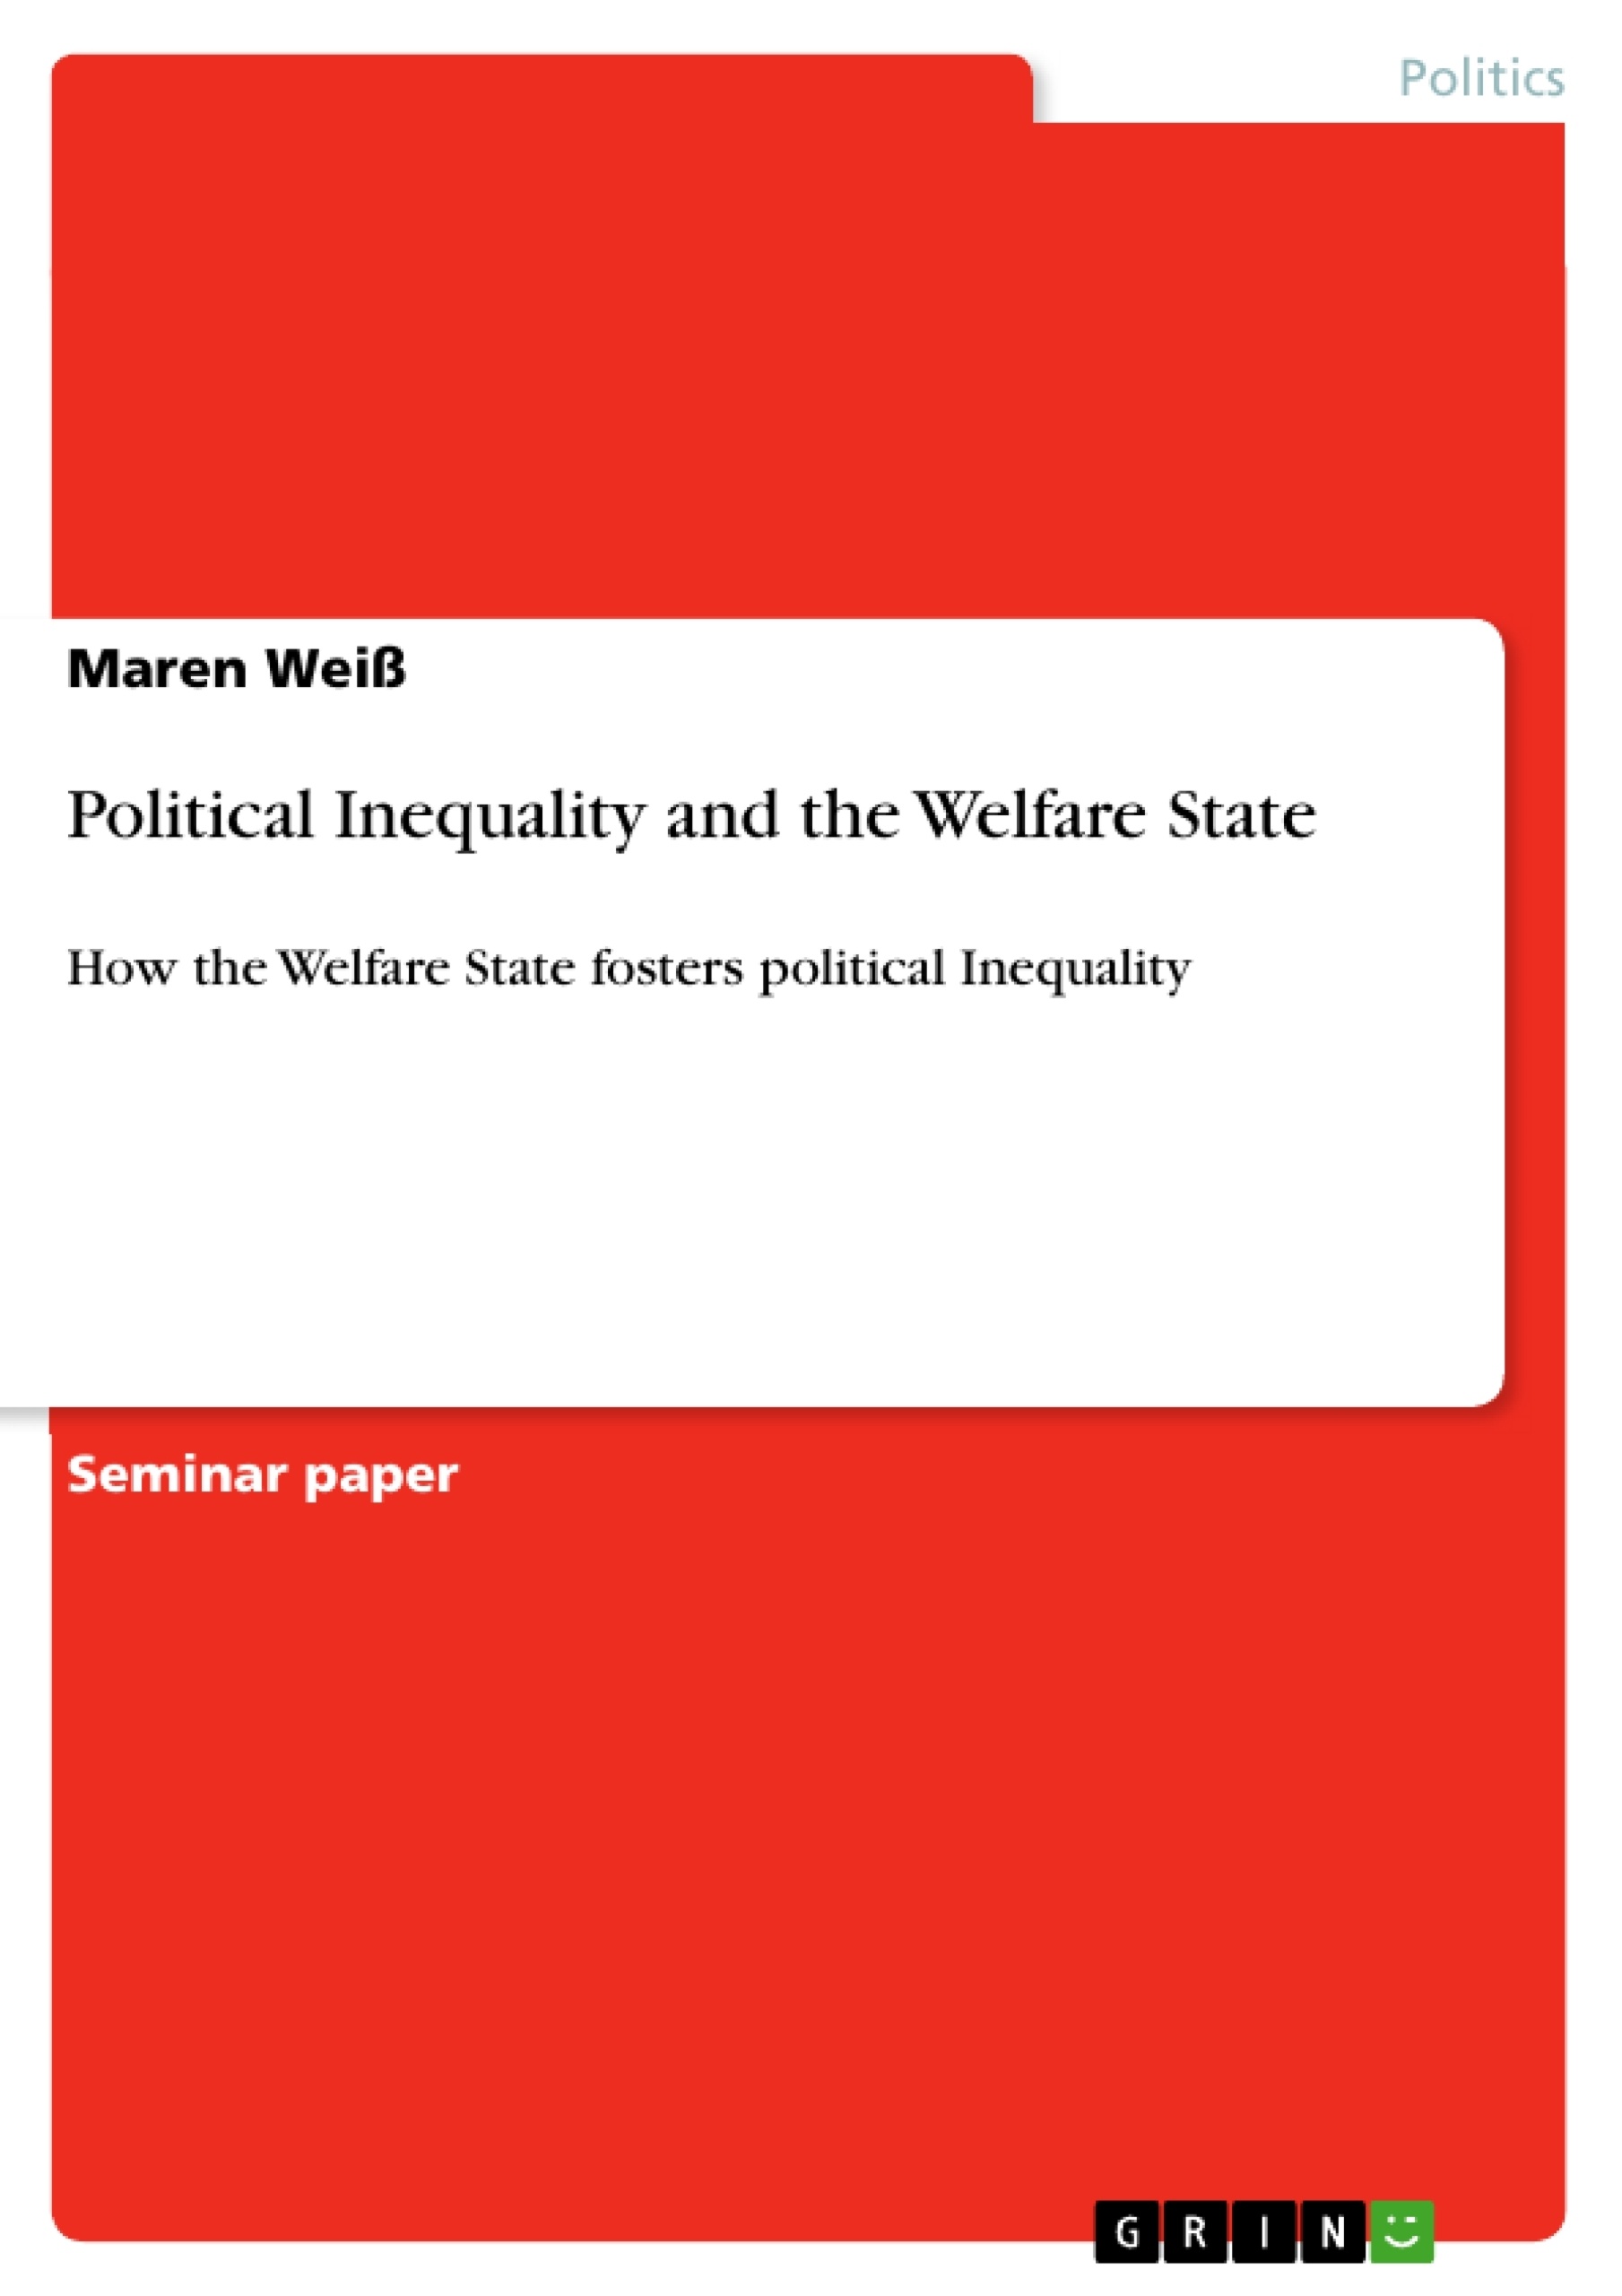 Title: Political Inequality and the Welfare State